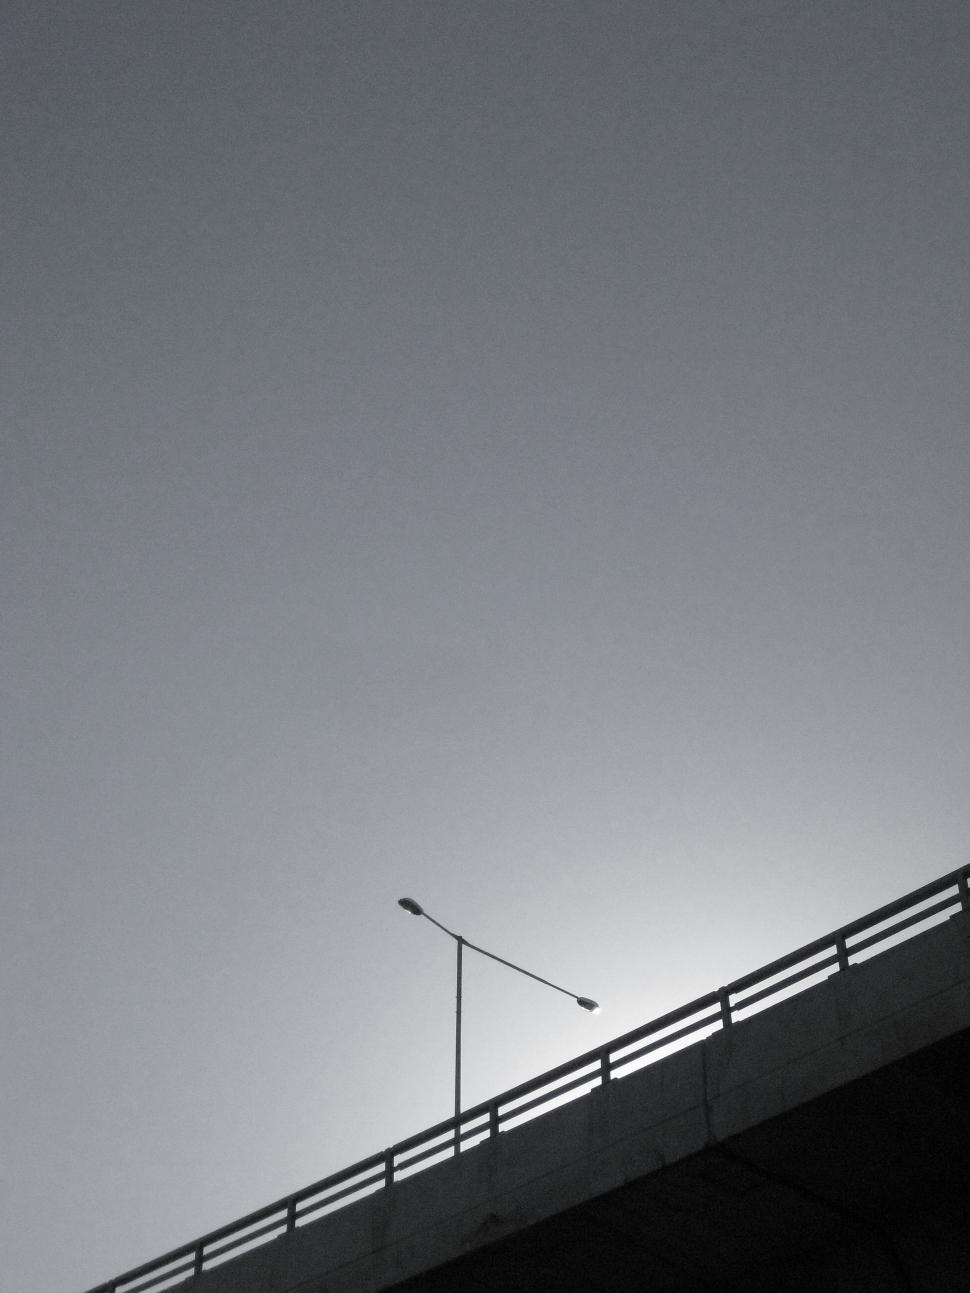 Free Image of Black and White Photo of a Street Light 